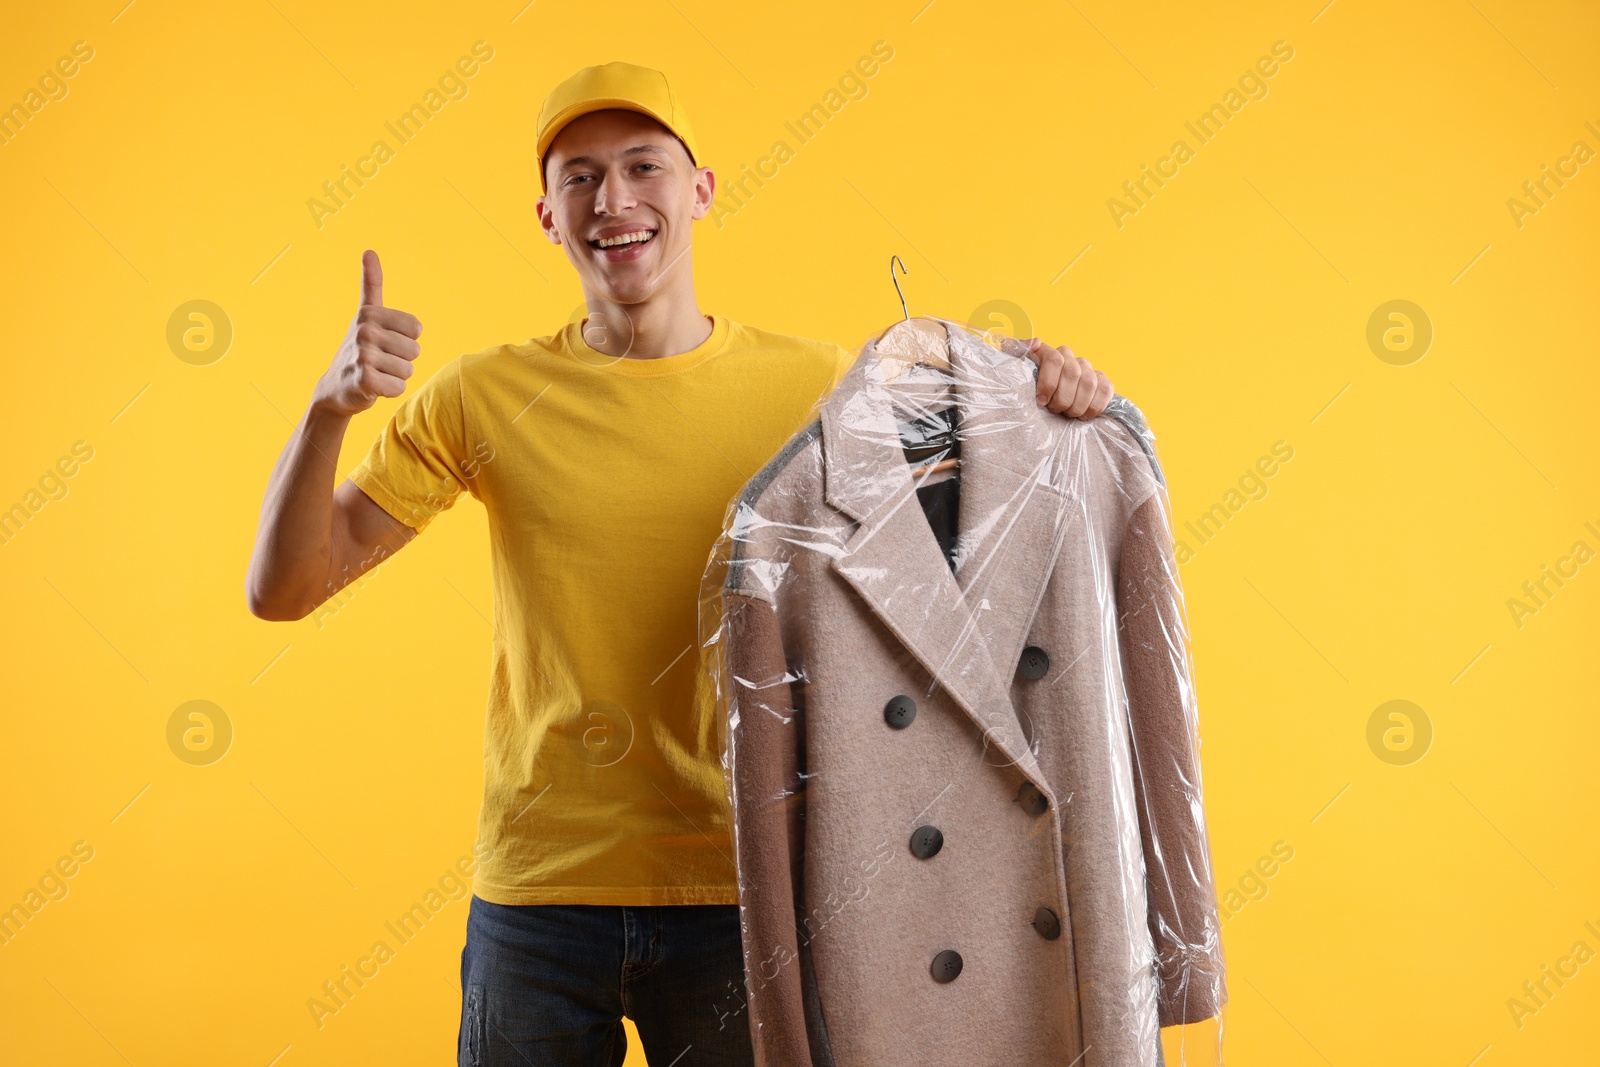 Photo of Dry-cleaning delivery. Happy courier holding coat in plastic bag and showing thumbs up on orange background